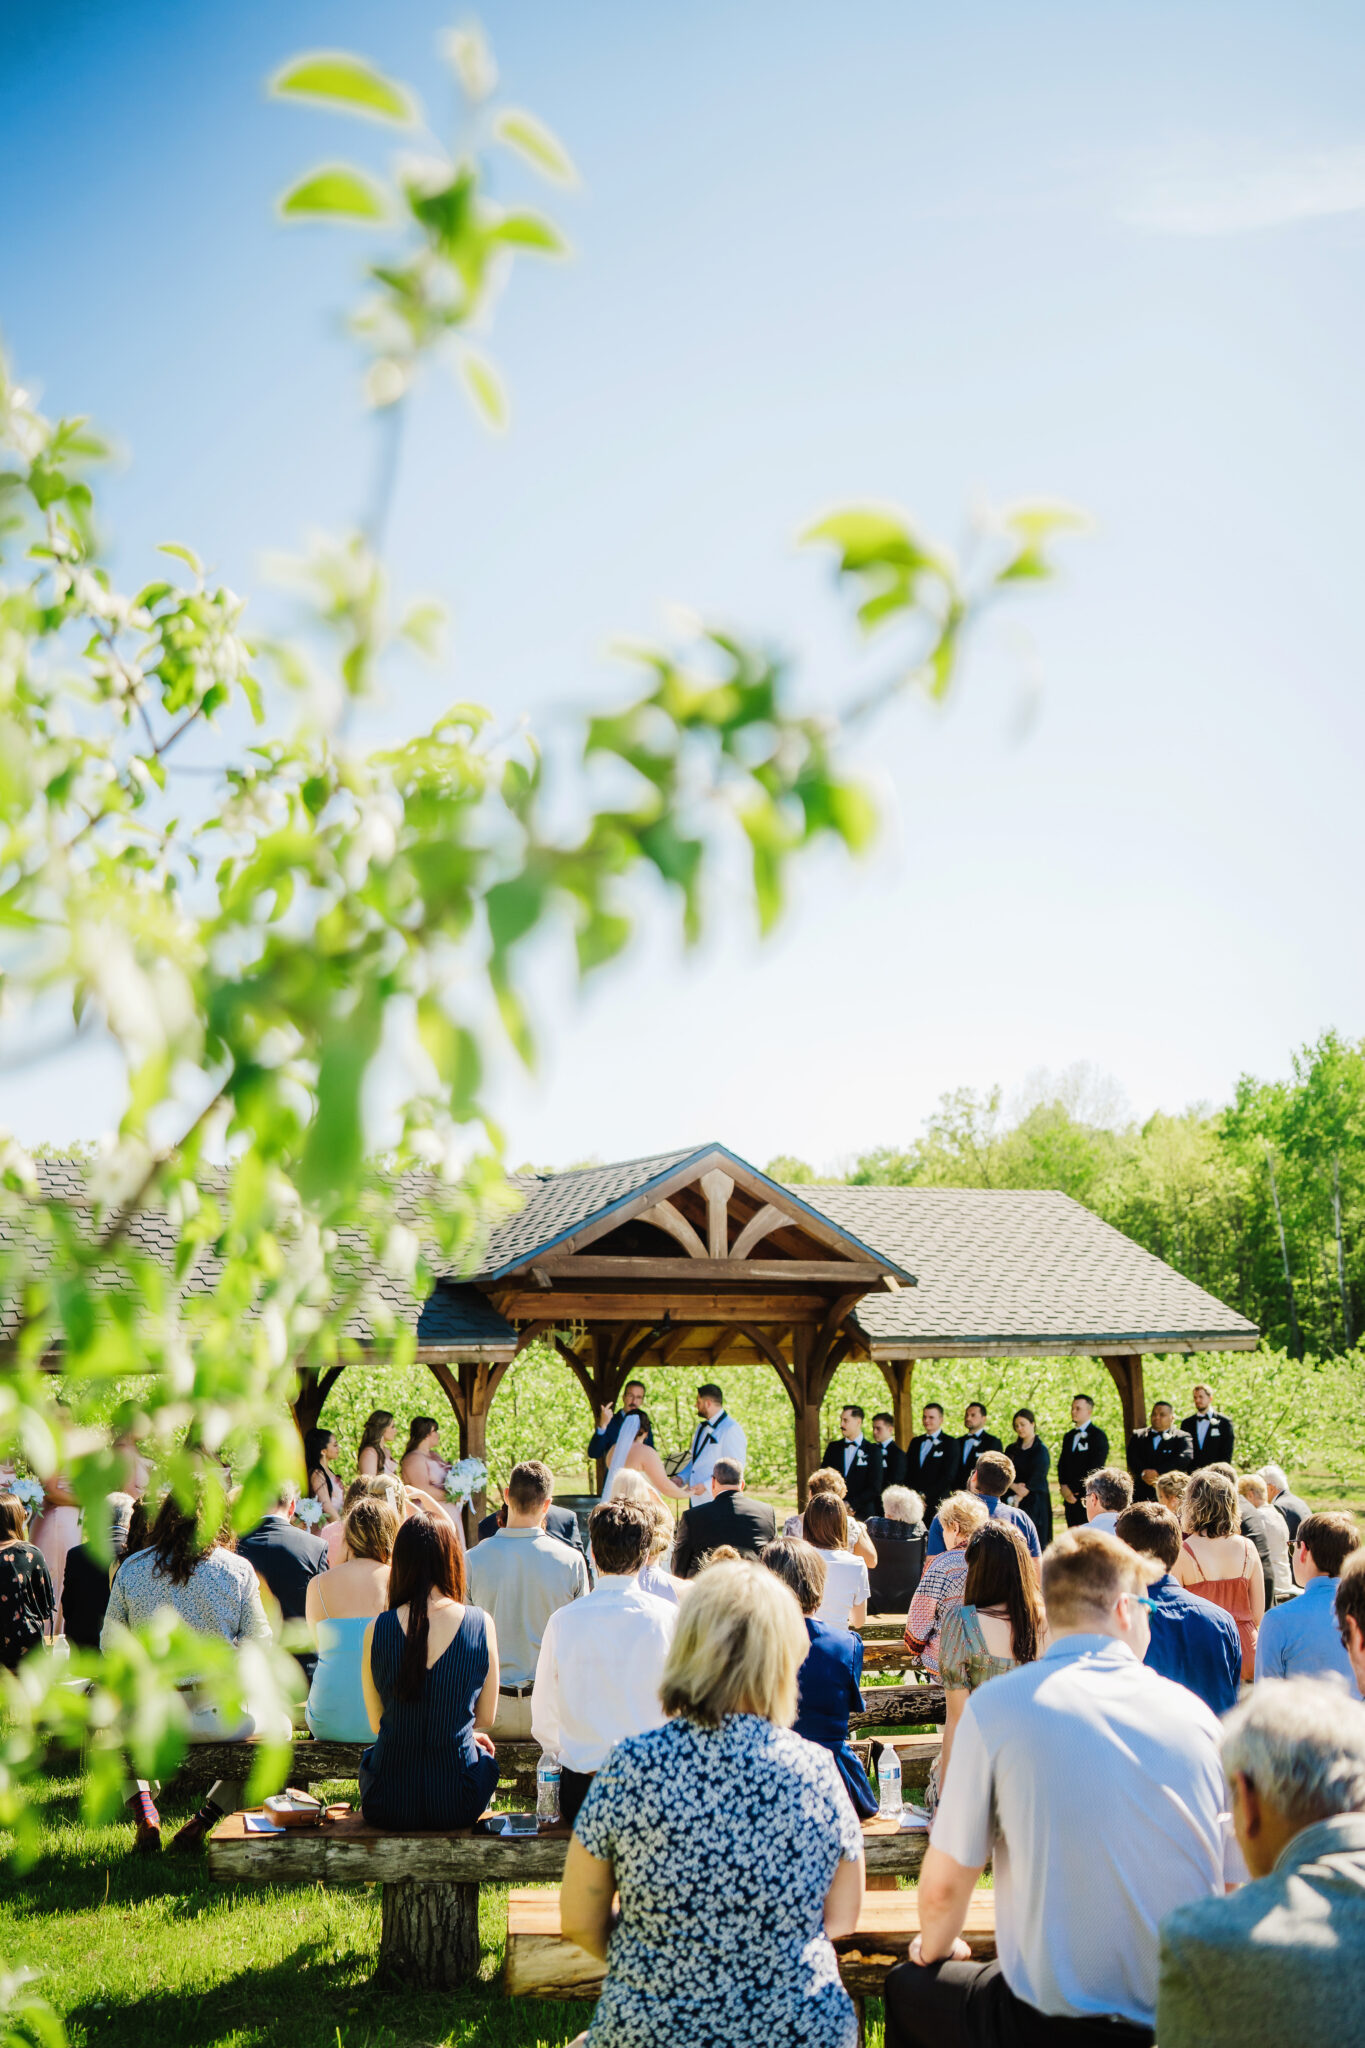 Family and friends are gathered for a spring wedding at Dixon Apple Orchard in Chippewa Valley, Wisconsin. Outdoor wedding ceremony Log bench seating #dixonappleorchard #orchardweddingvenue #outdoorwedding #appleorchardwedding #wisconsinweddingvenue